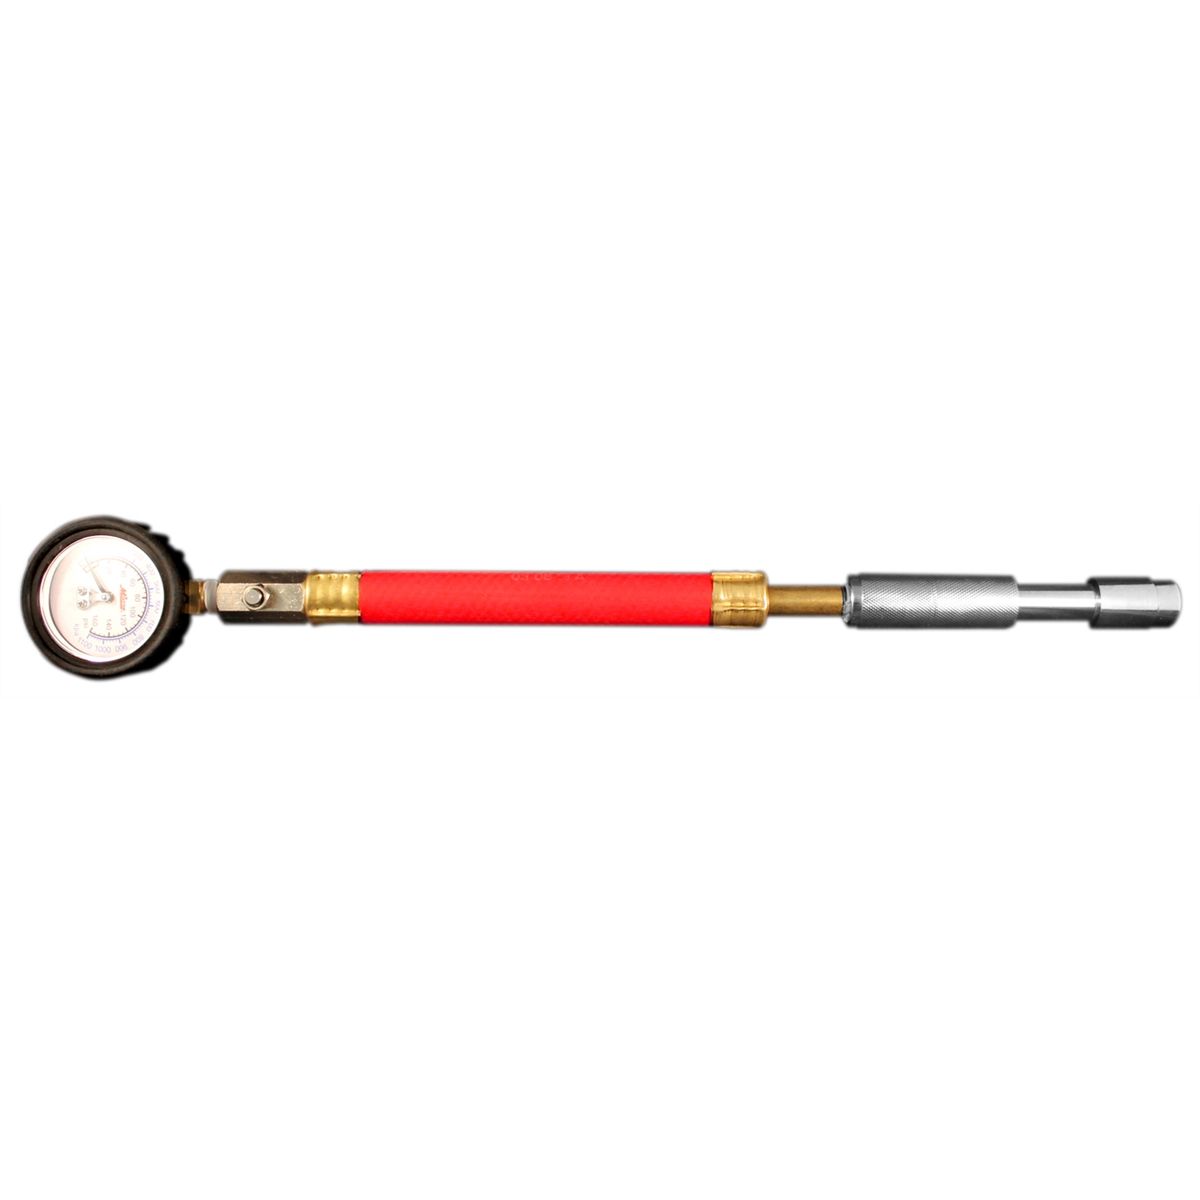 Large Bore Extended Reach Dial Tire Pressure Gauge